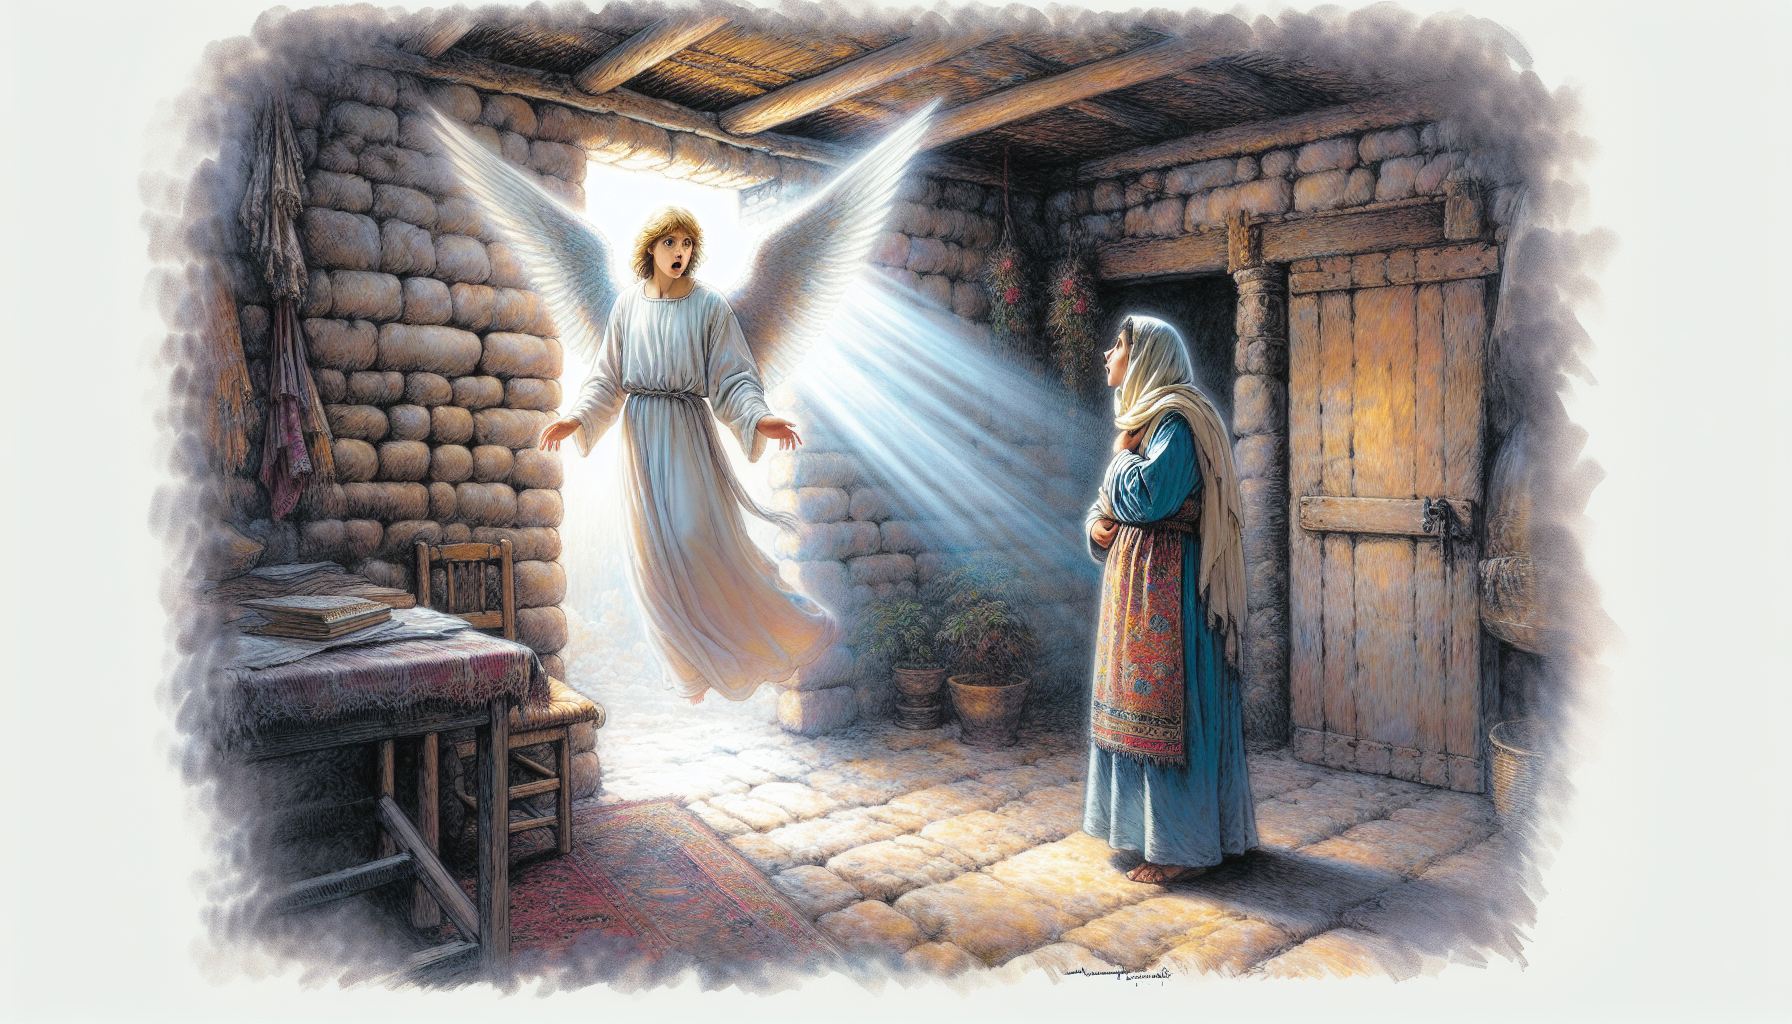 An angel appearing to Mary in a humble, rustic Middle Eastern home, with soft rays of light illuminating the scene, surrounded by modest decor and an aura of awe and serenity.